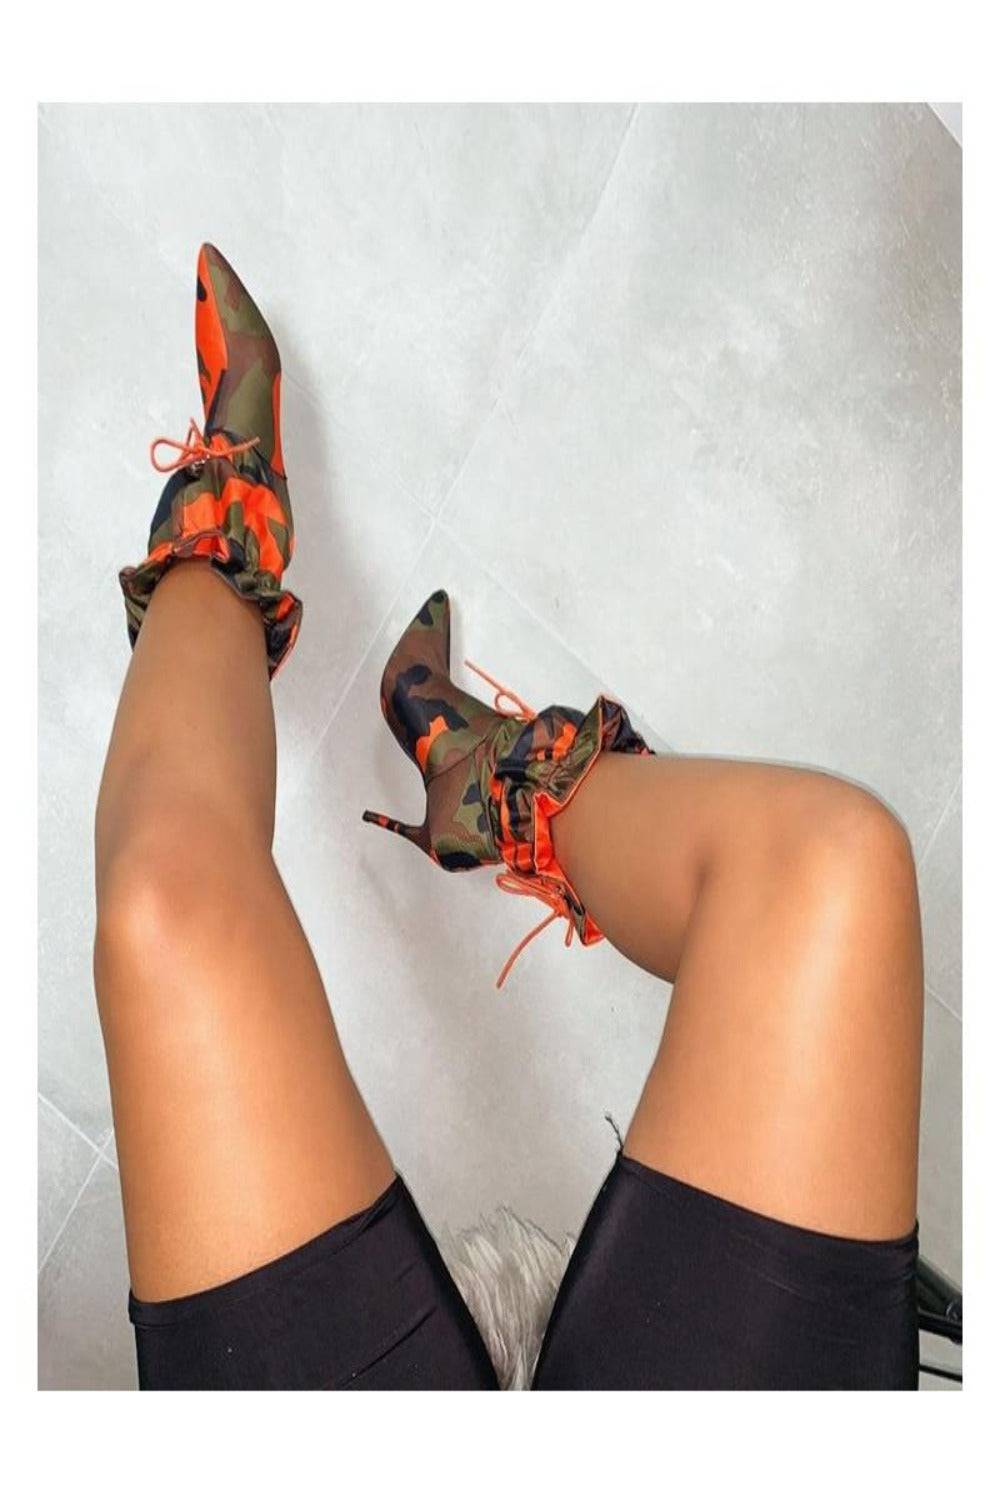 Handmade Camo Lace Up Orange Stiletto High Heel Ankle Boots - TGC Boutique - High Heel Boots